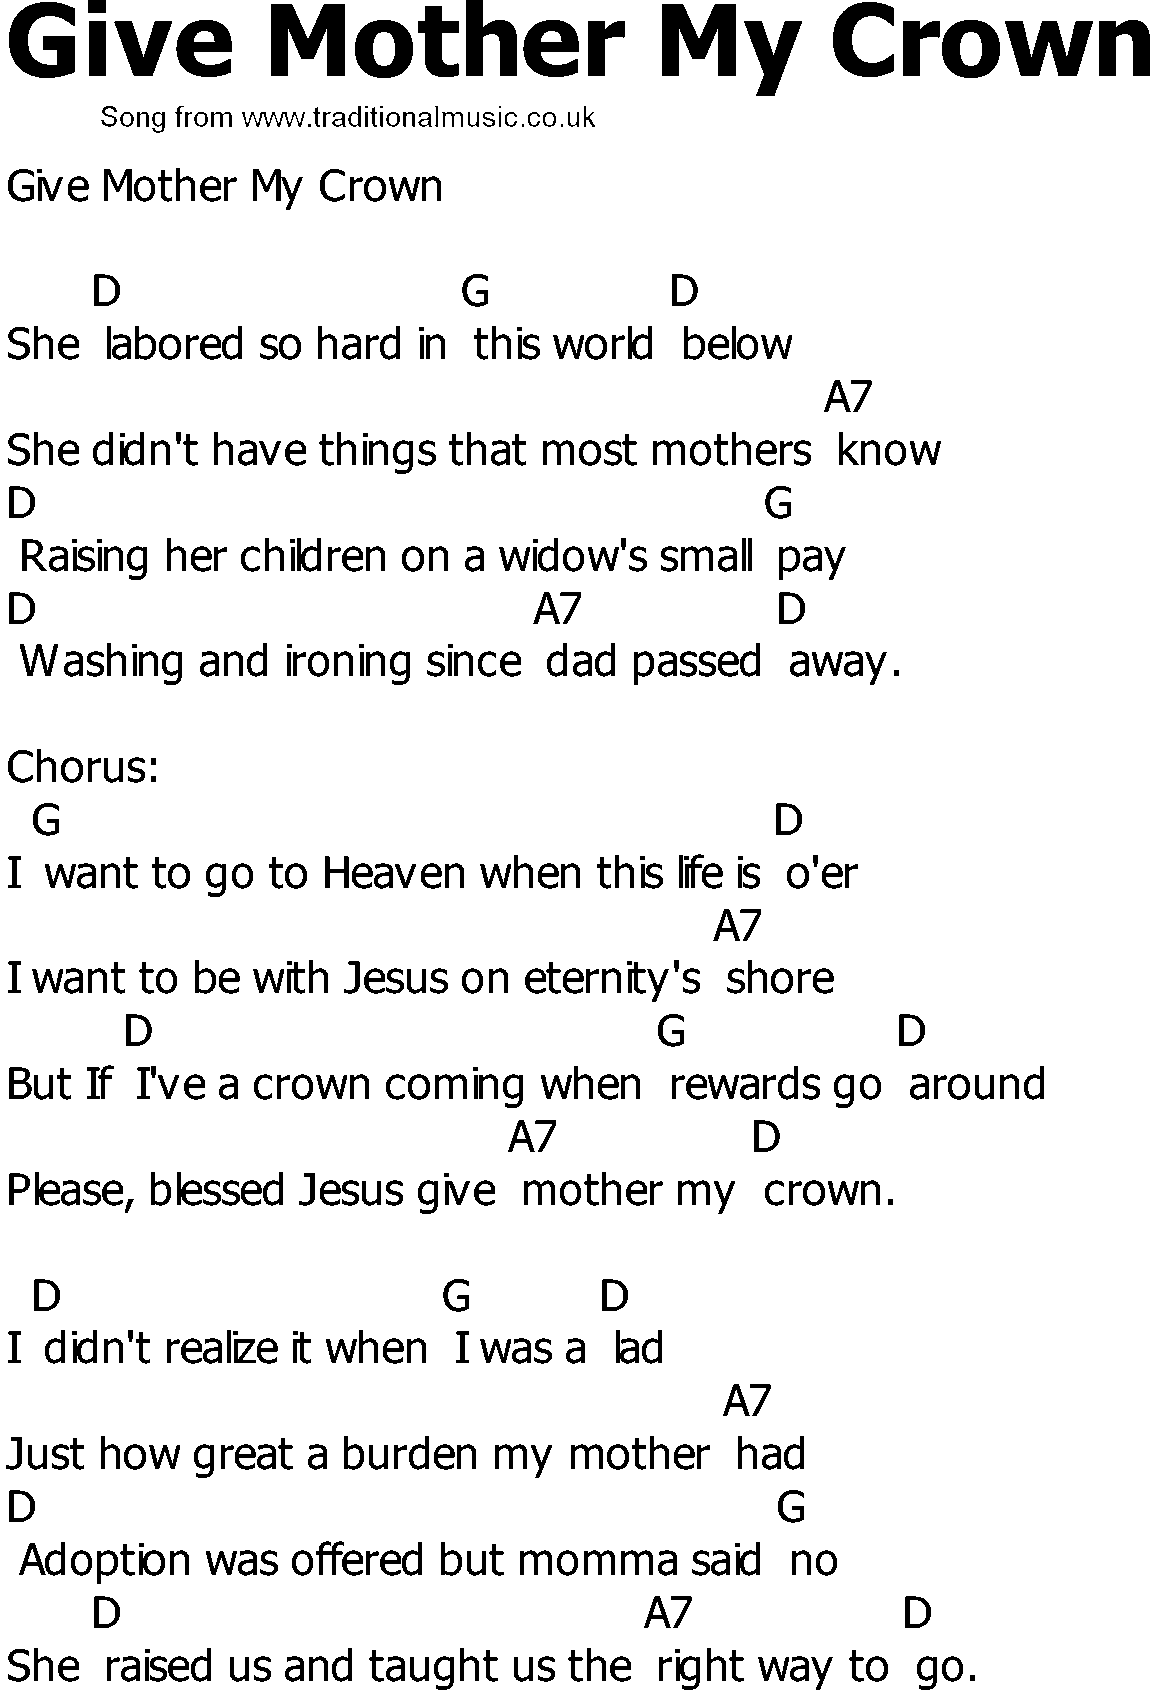 Old Country song lyrics with chords - Give Mother My Crown